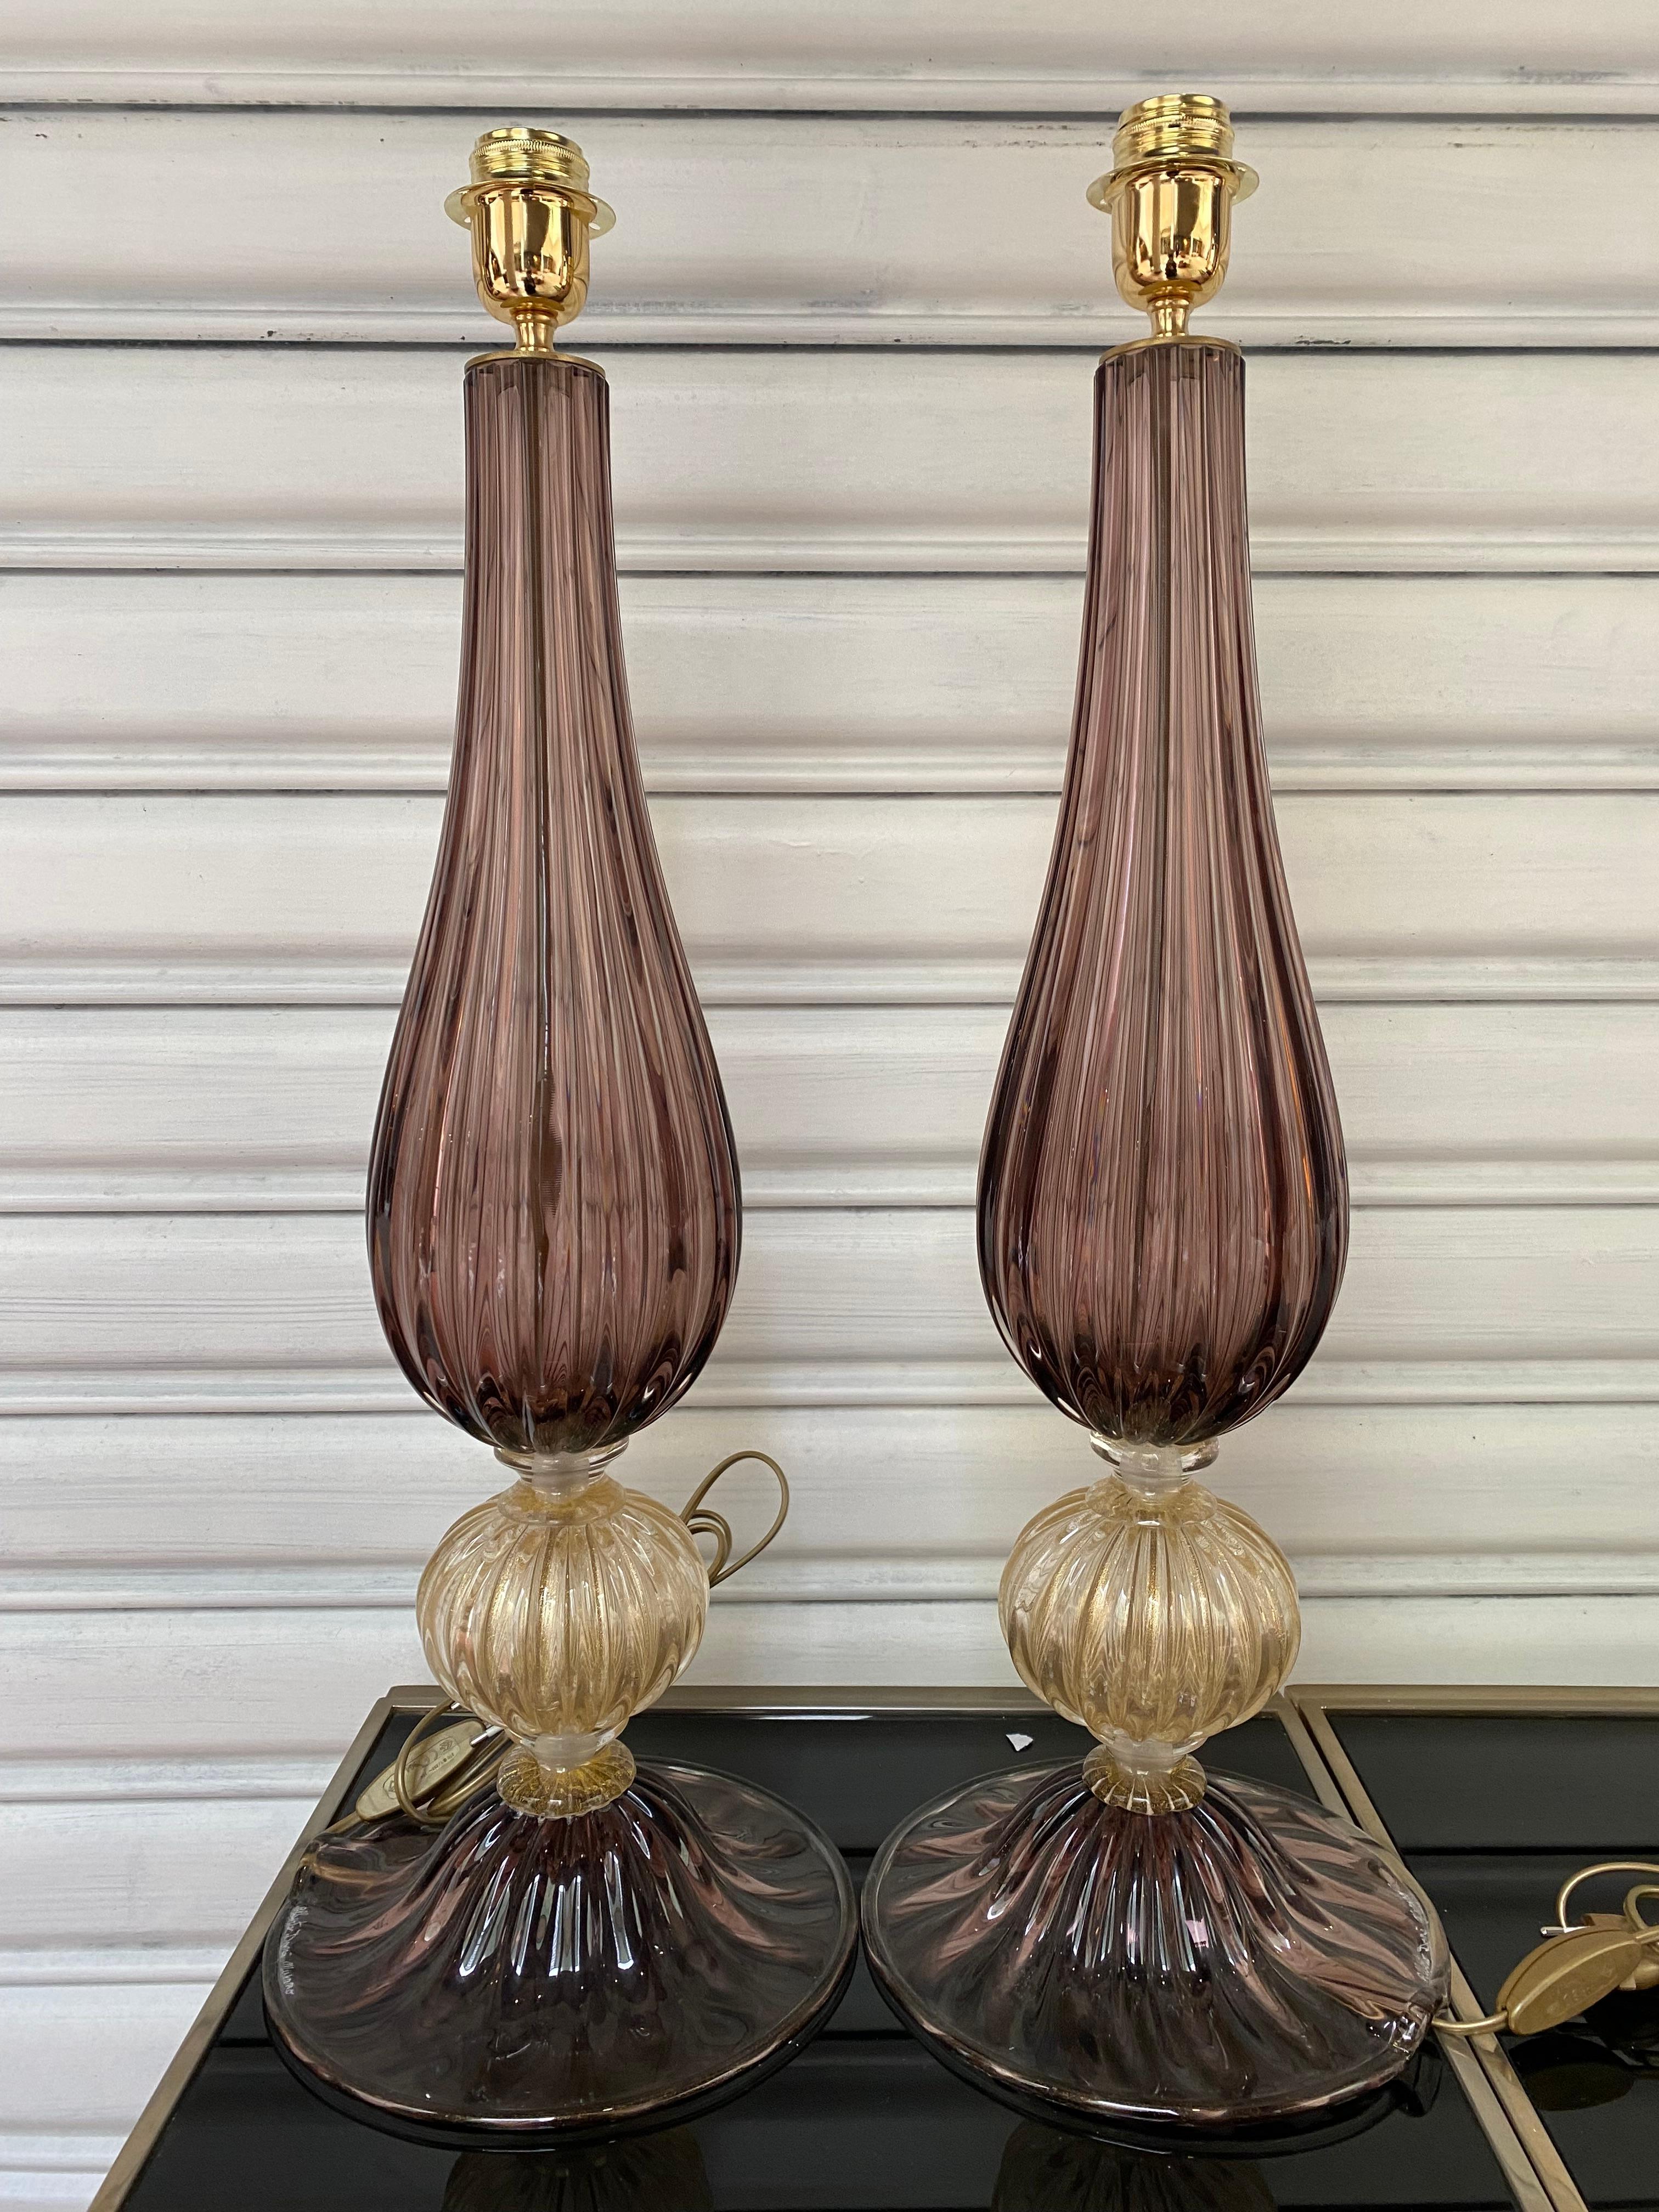 Pair of violet lamps Alberto Dona Murano (11 and 12)
Circa 1970
Signed on the foot 
Dimensions : h68x23cm
Ref : c/1932/22
Price : 3800 € for the pair